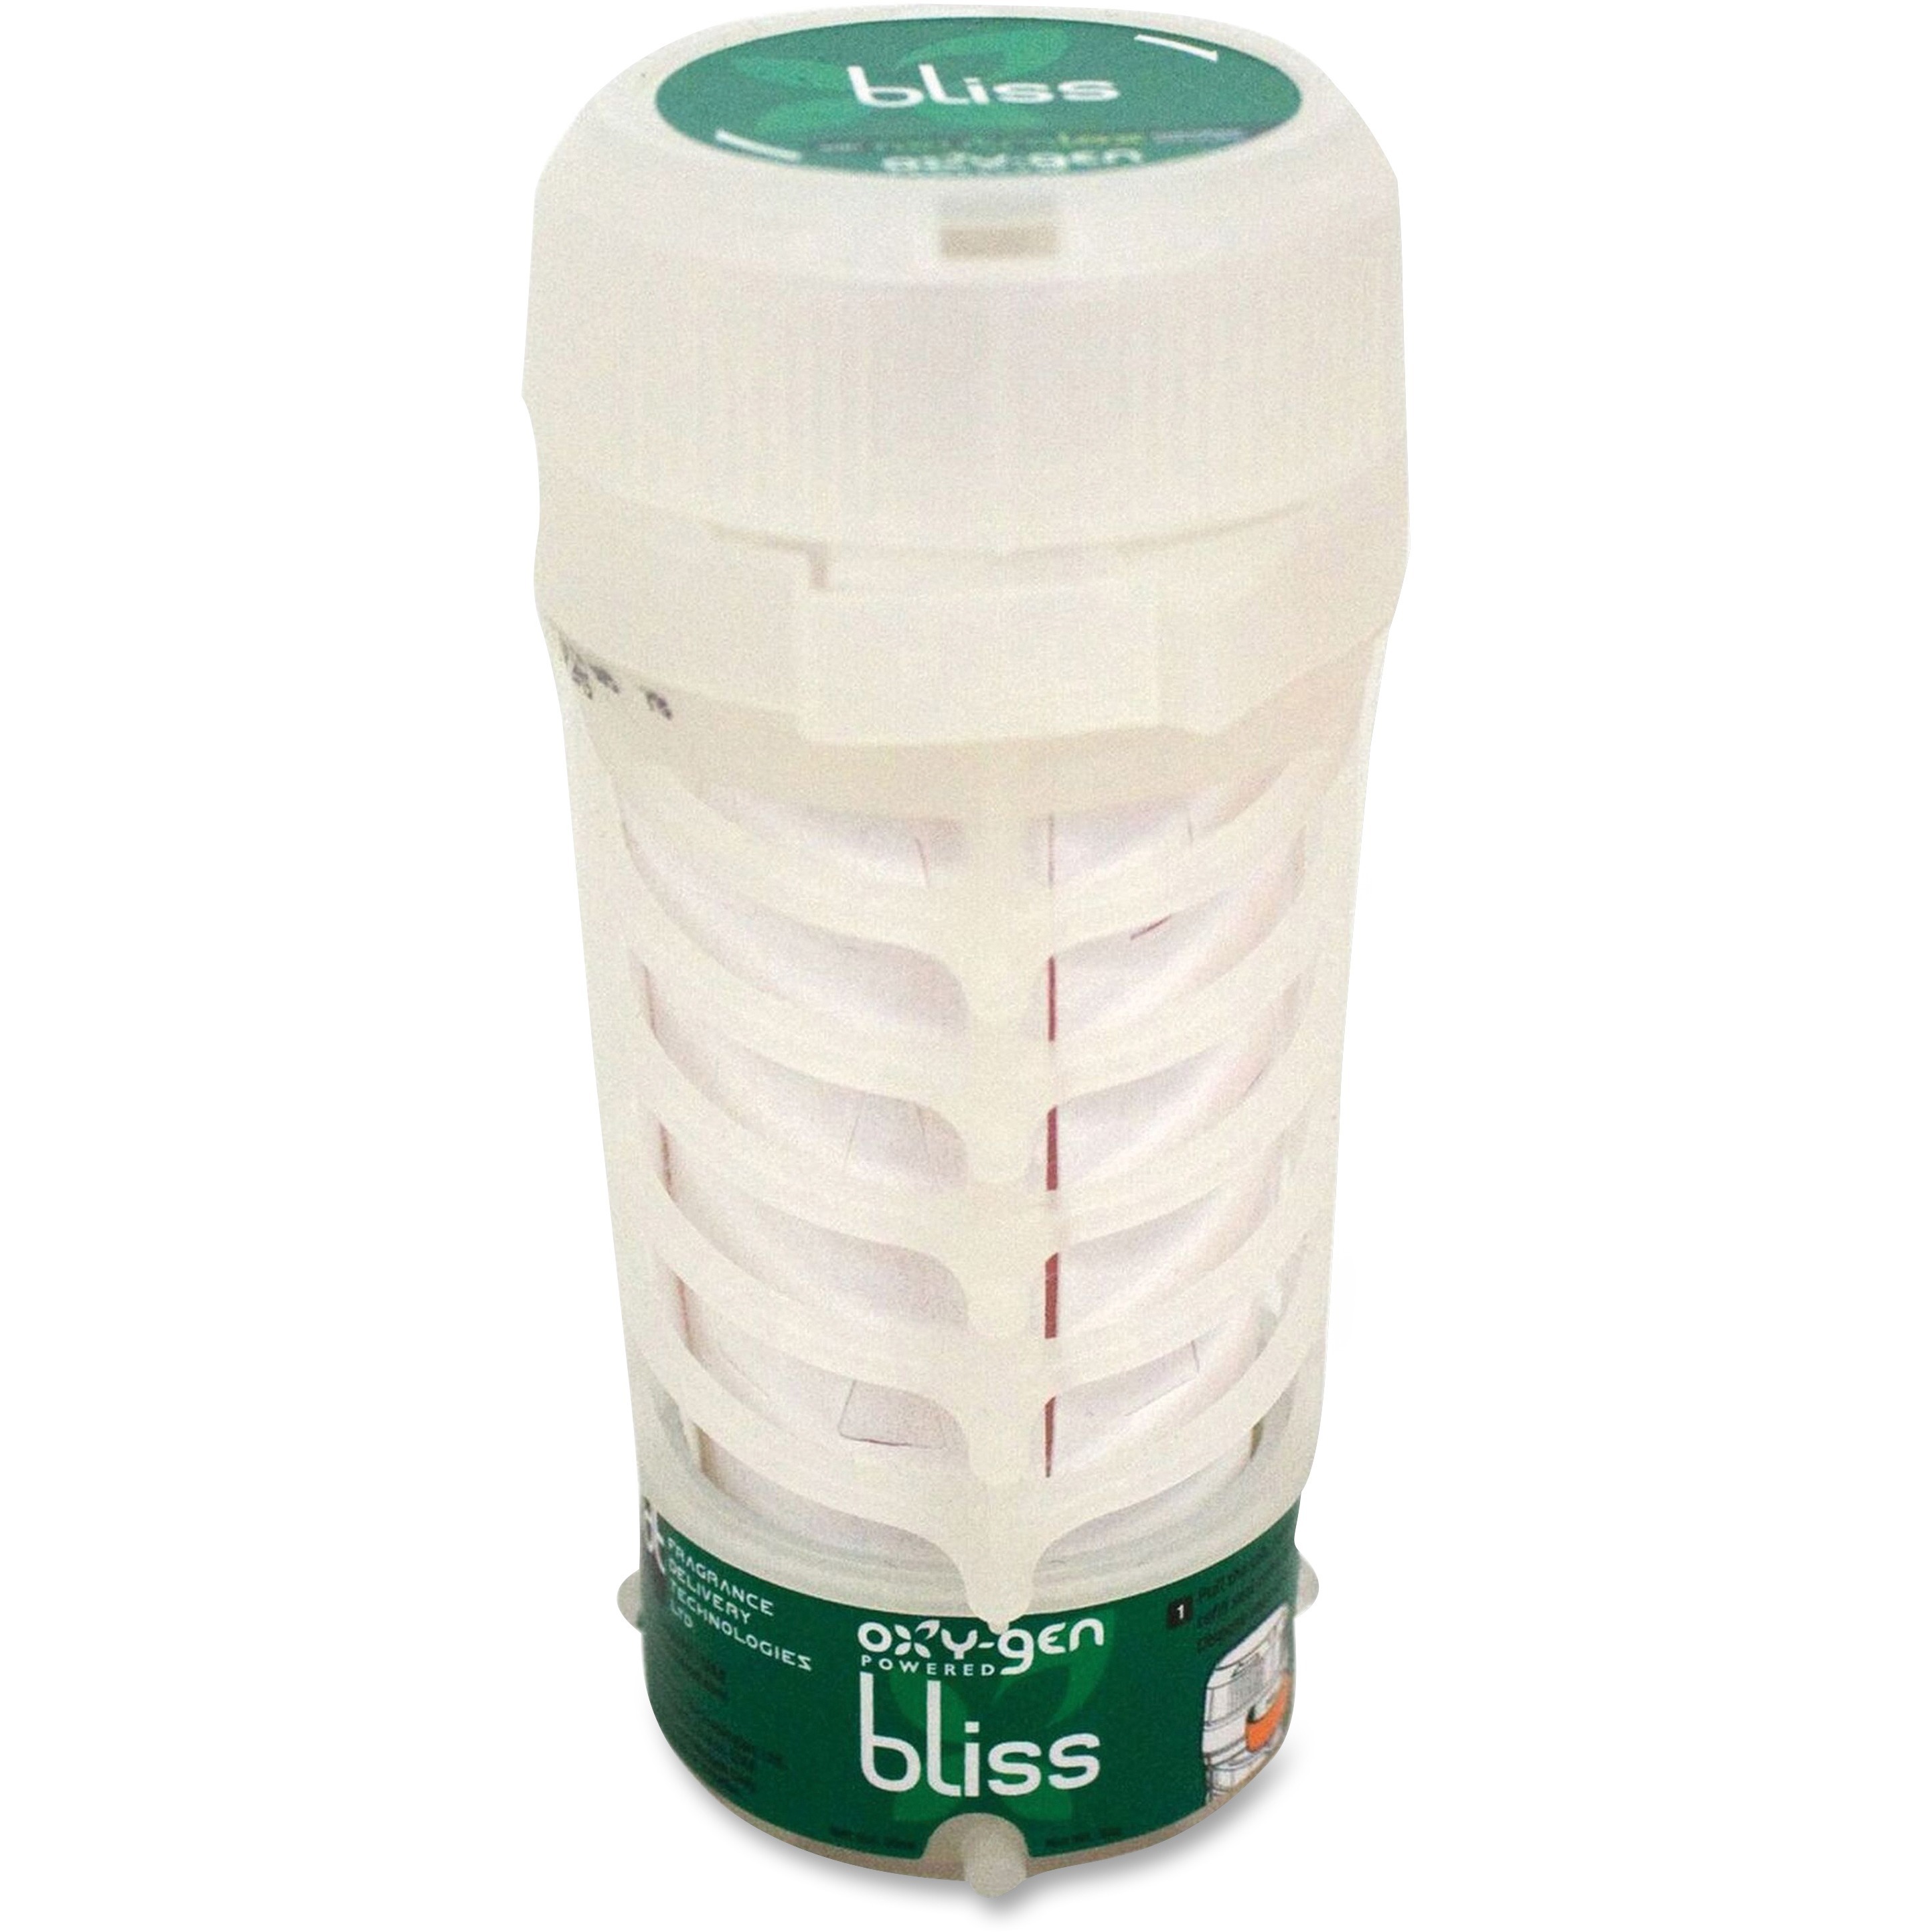 RMC, RCM11963186, Care Sys Dispenser Bliss Scent, 1 Each, White/Green - image 1 of 2